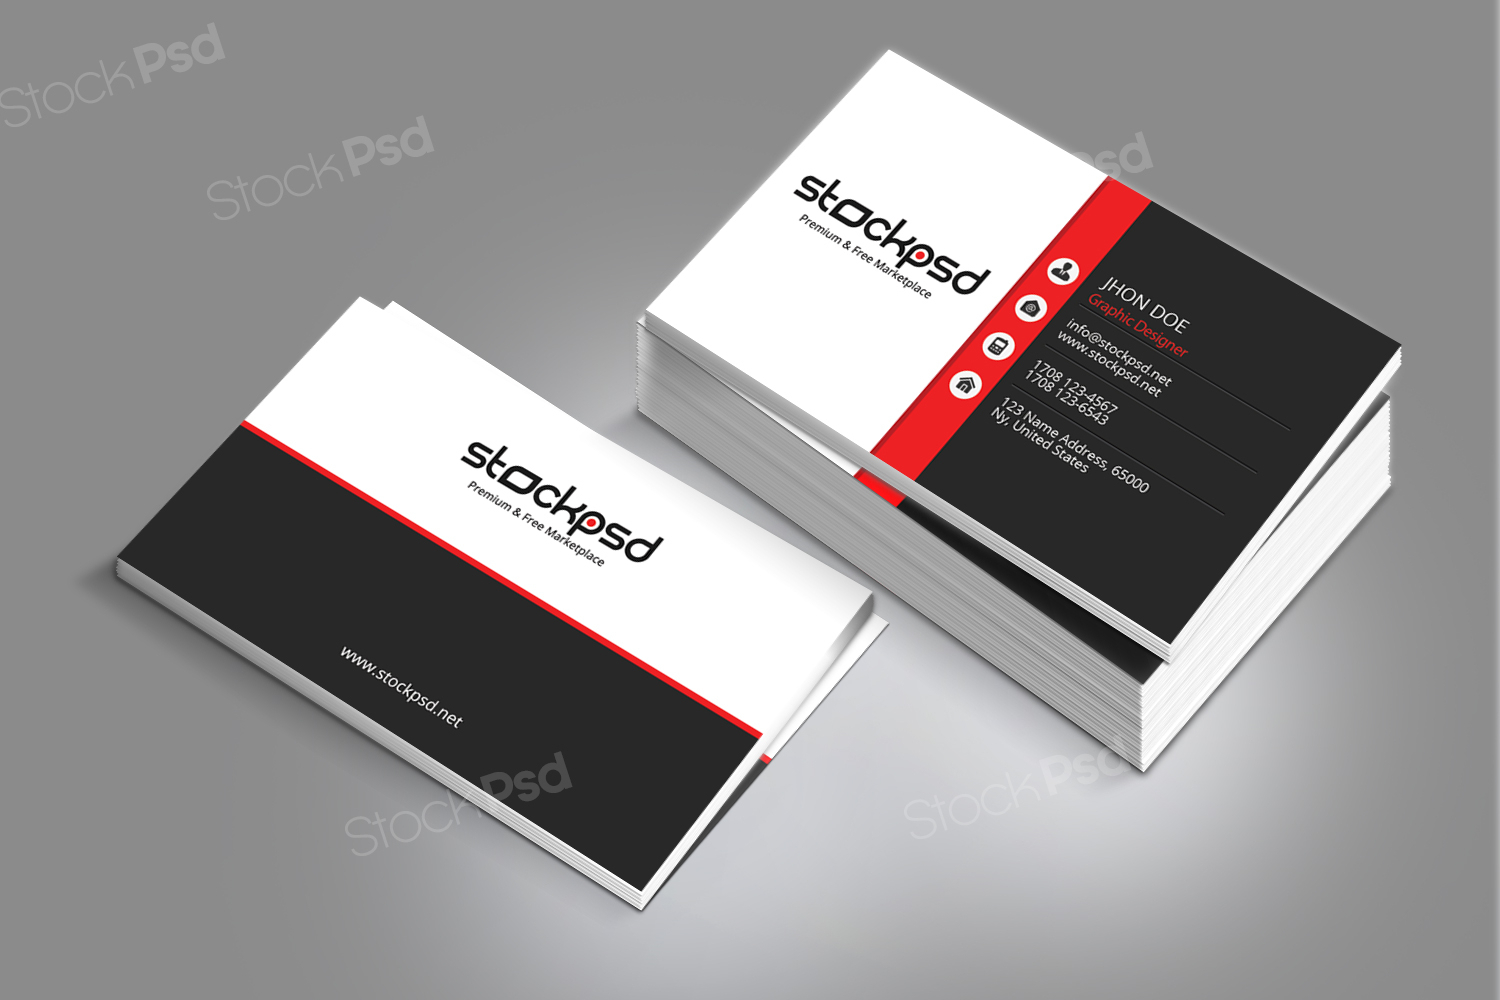 022 Template Ideas Free Photoshop Business Card Personal Psd Regarding Free Personal Business Card Templates